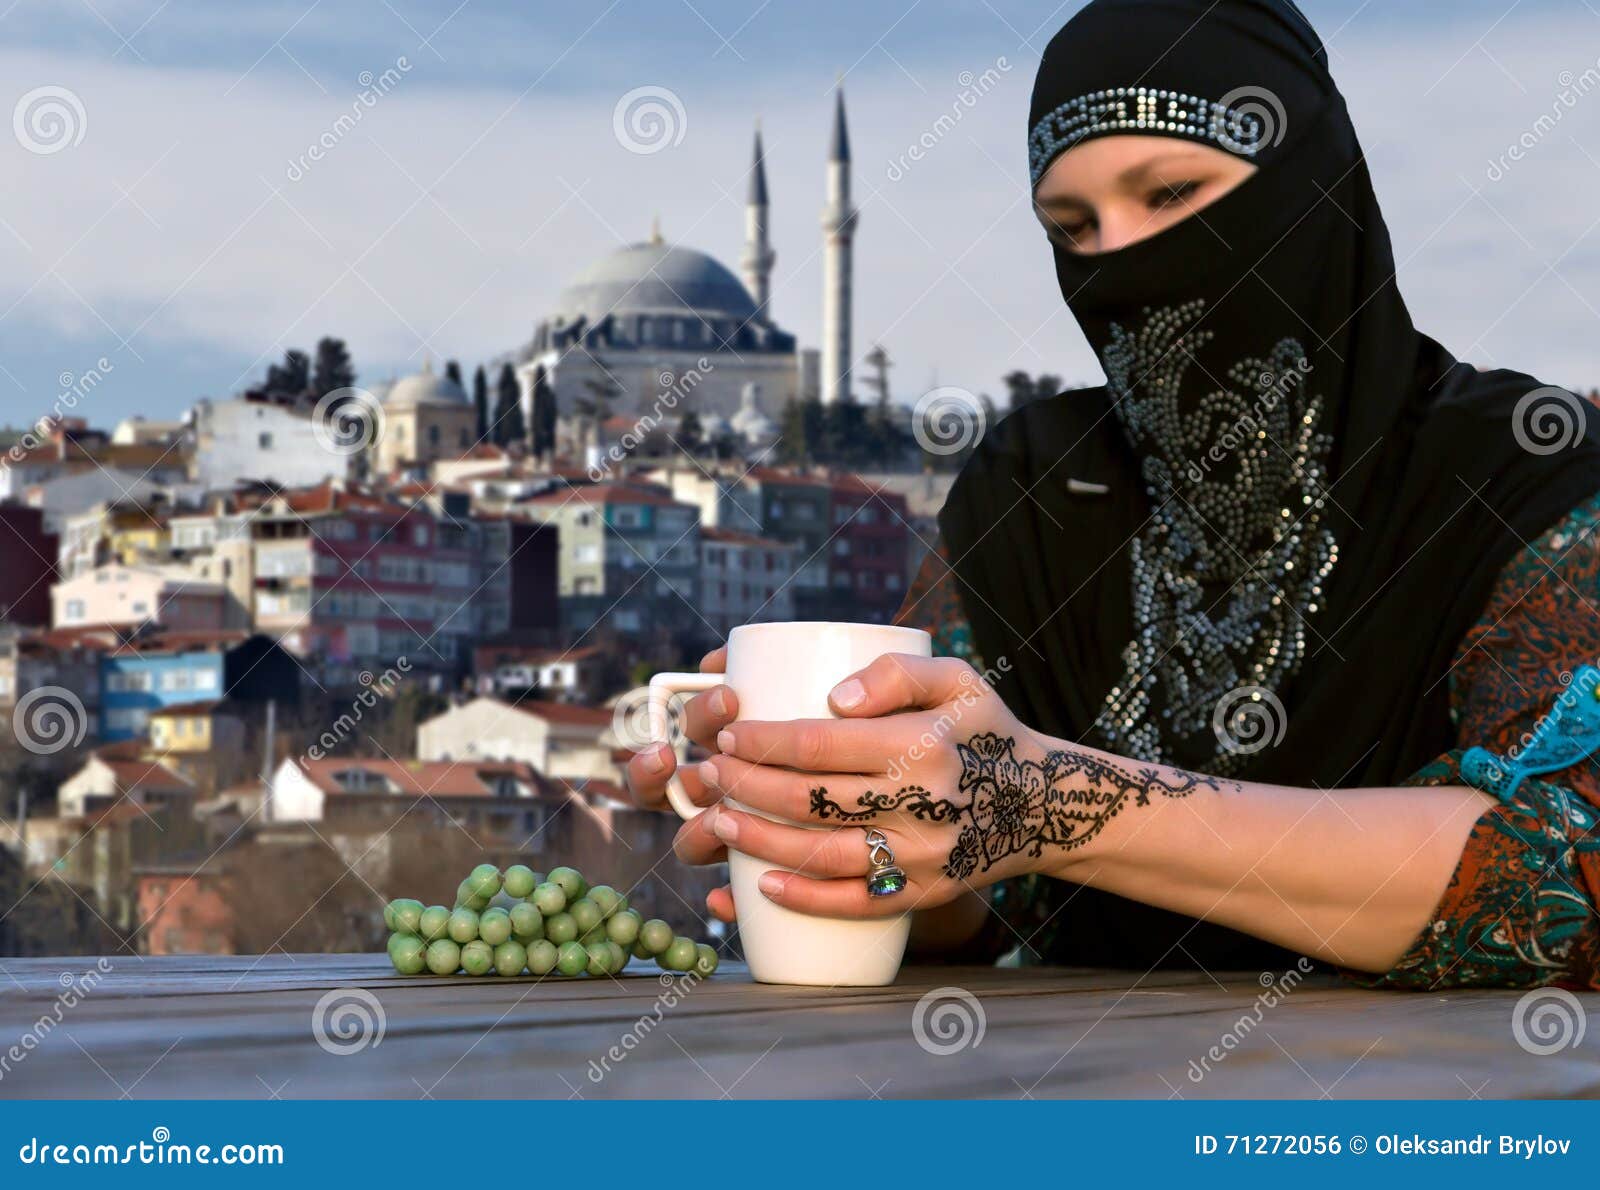 Middle Eastern Woman At Cafe Terrace Stock Photo Image Of Background Clothing